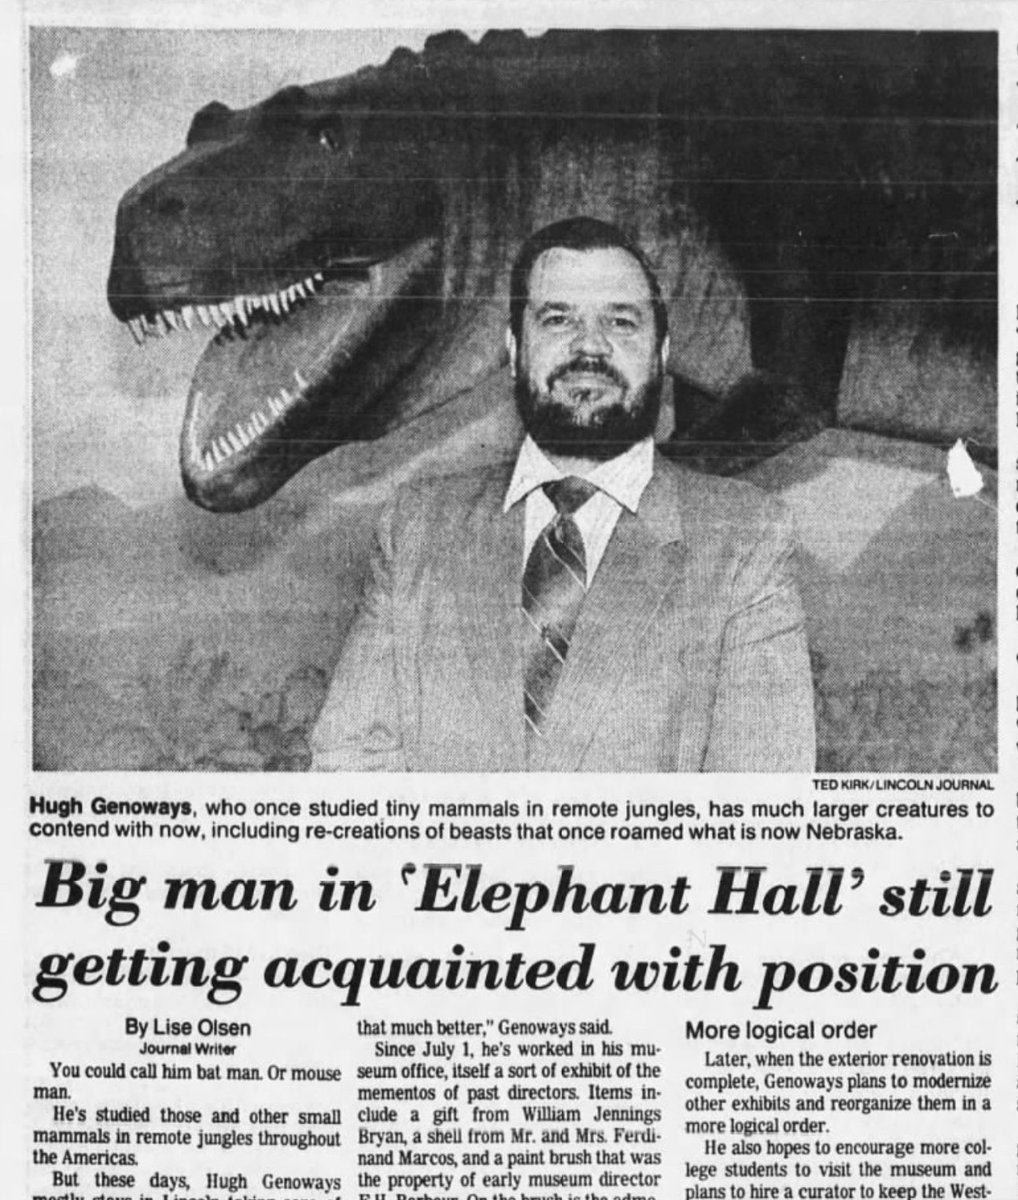 In 1986, we moved back to Nebraska, and he became the director of the University of Nebraska State Museum, housed in Morrill Hall but affectionately known as “Elephant Hall” because of all the fossil mammoth and mastodons on exhibit there.